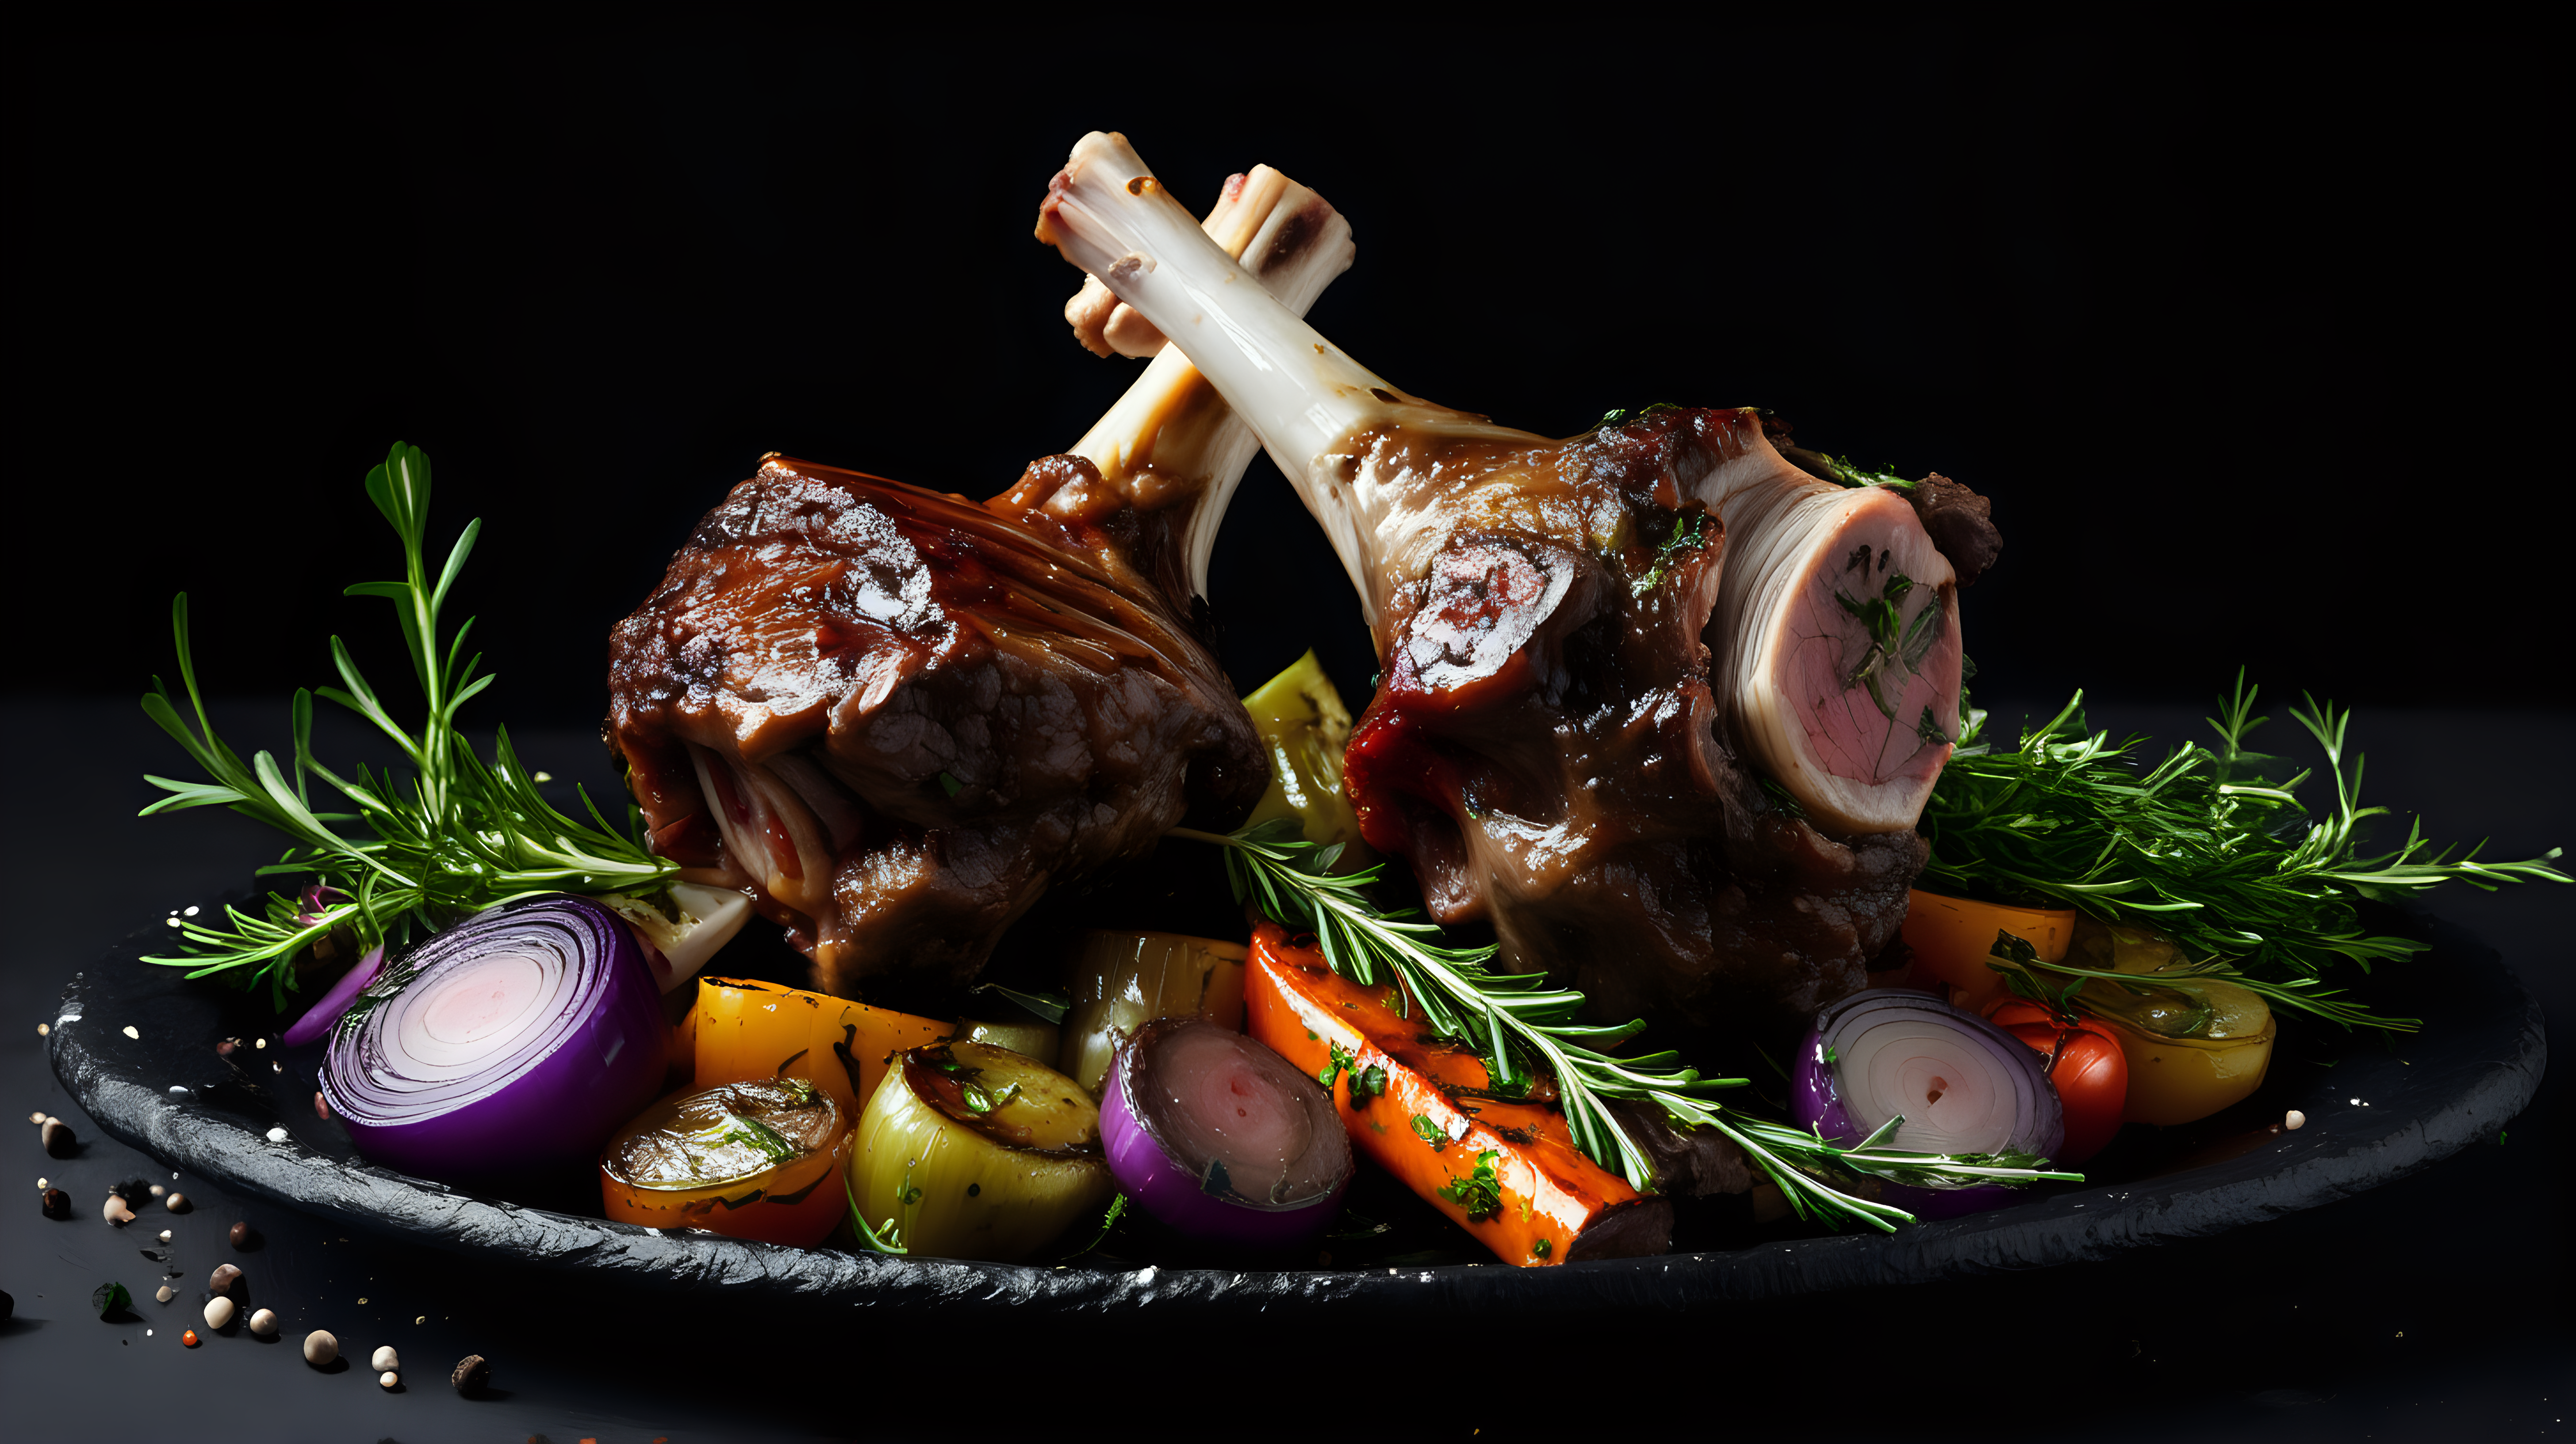 Grill lamb shank with herbs and vegetables, black background 